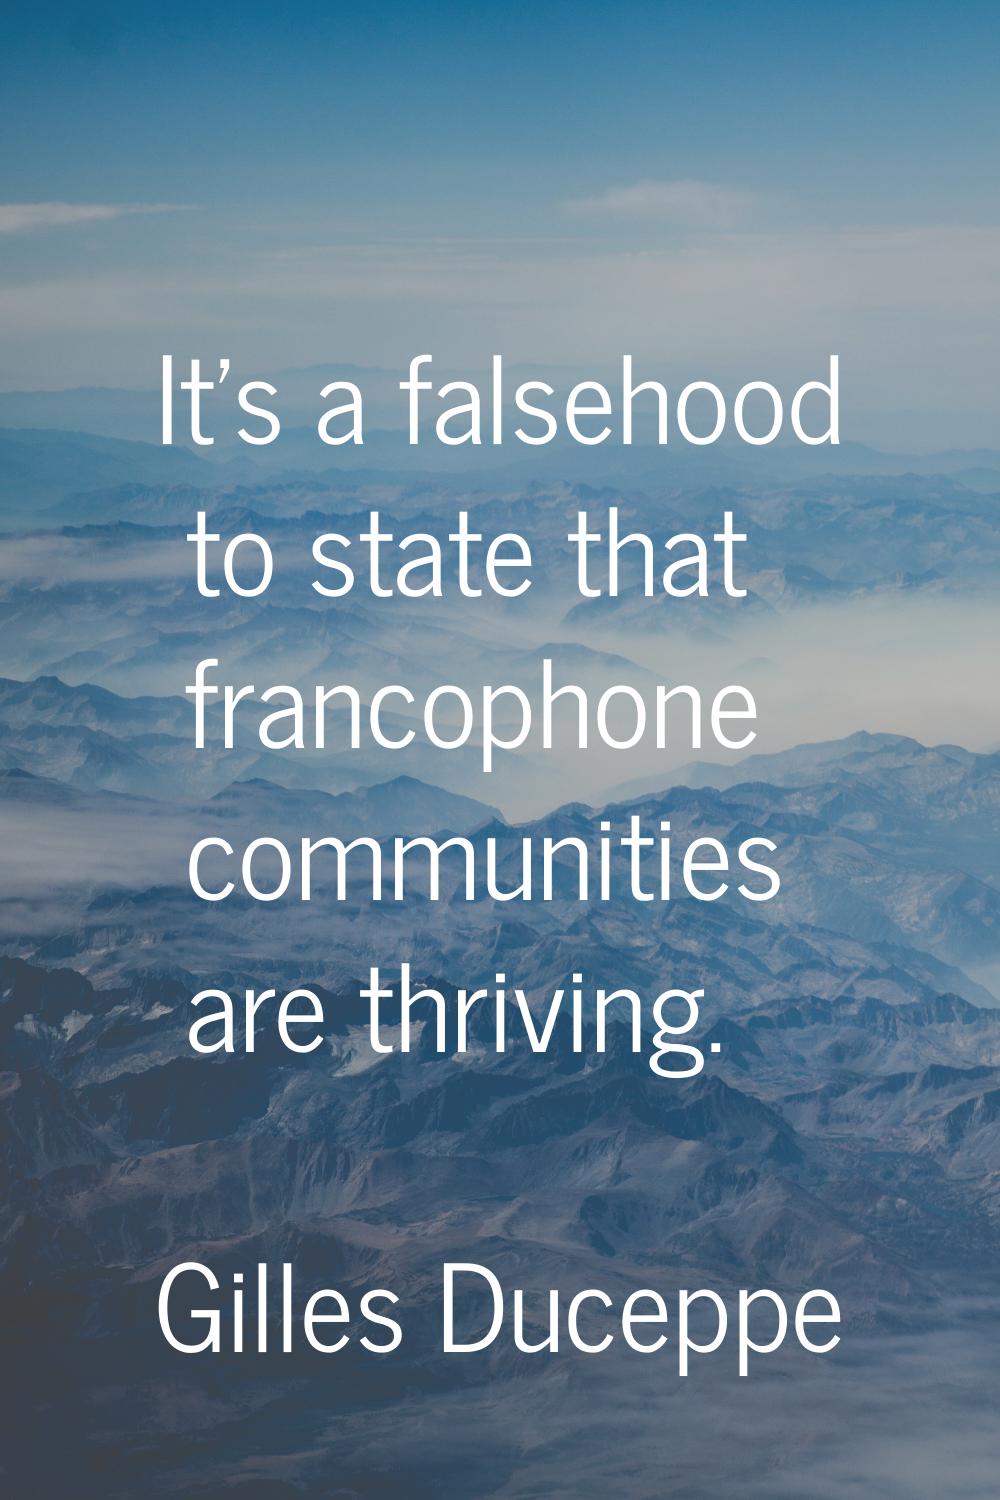 It's a falsehood to state that francophone communities are thriving.